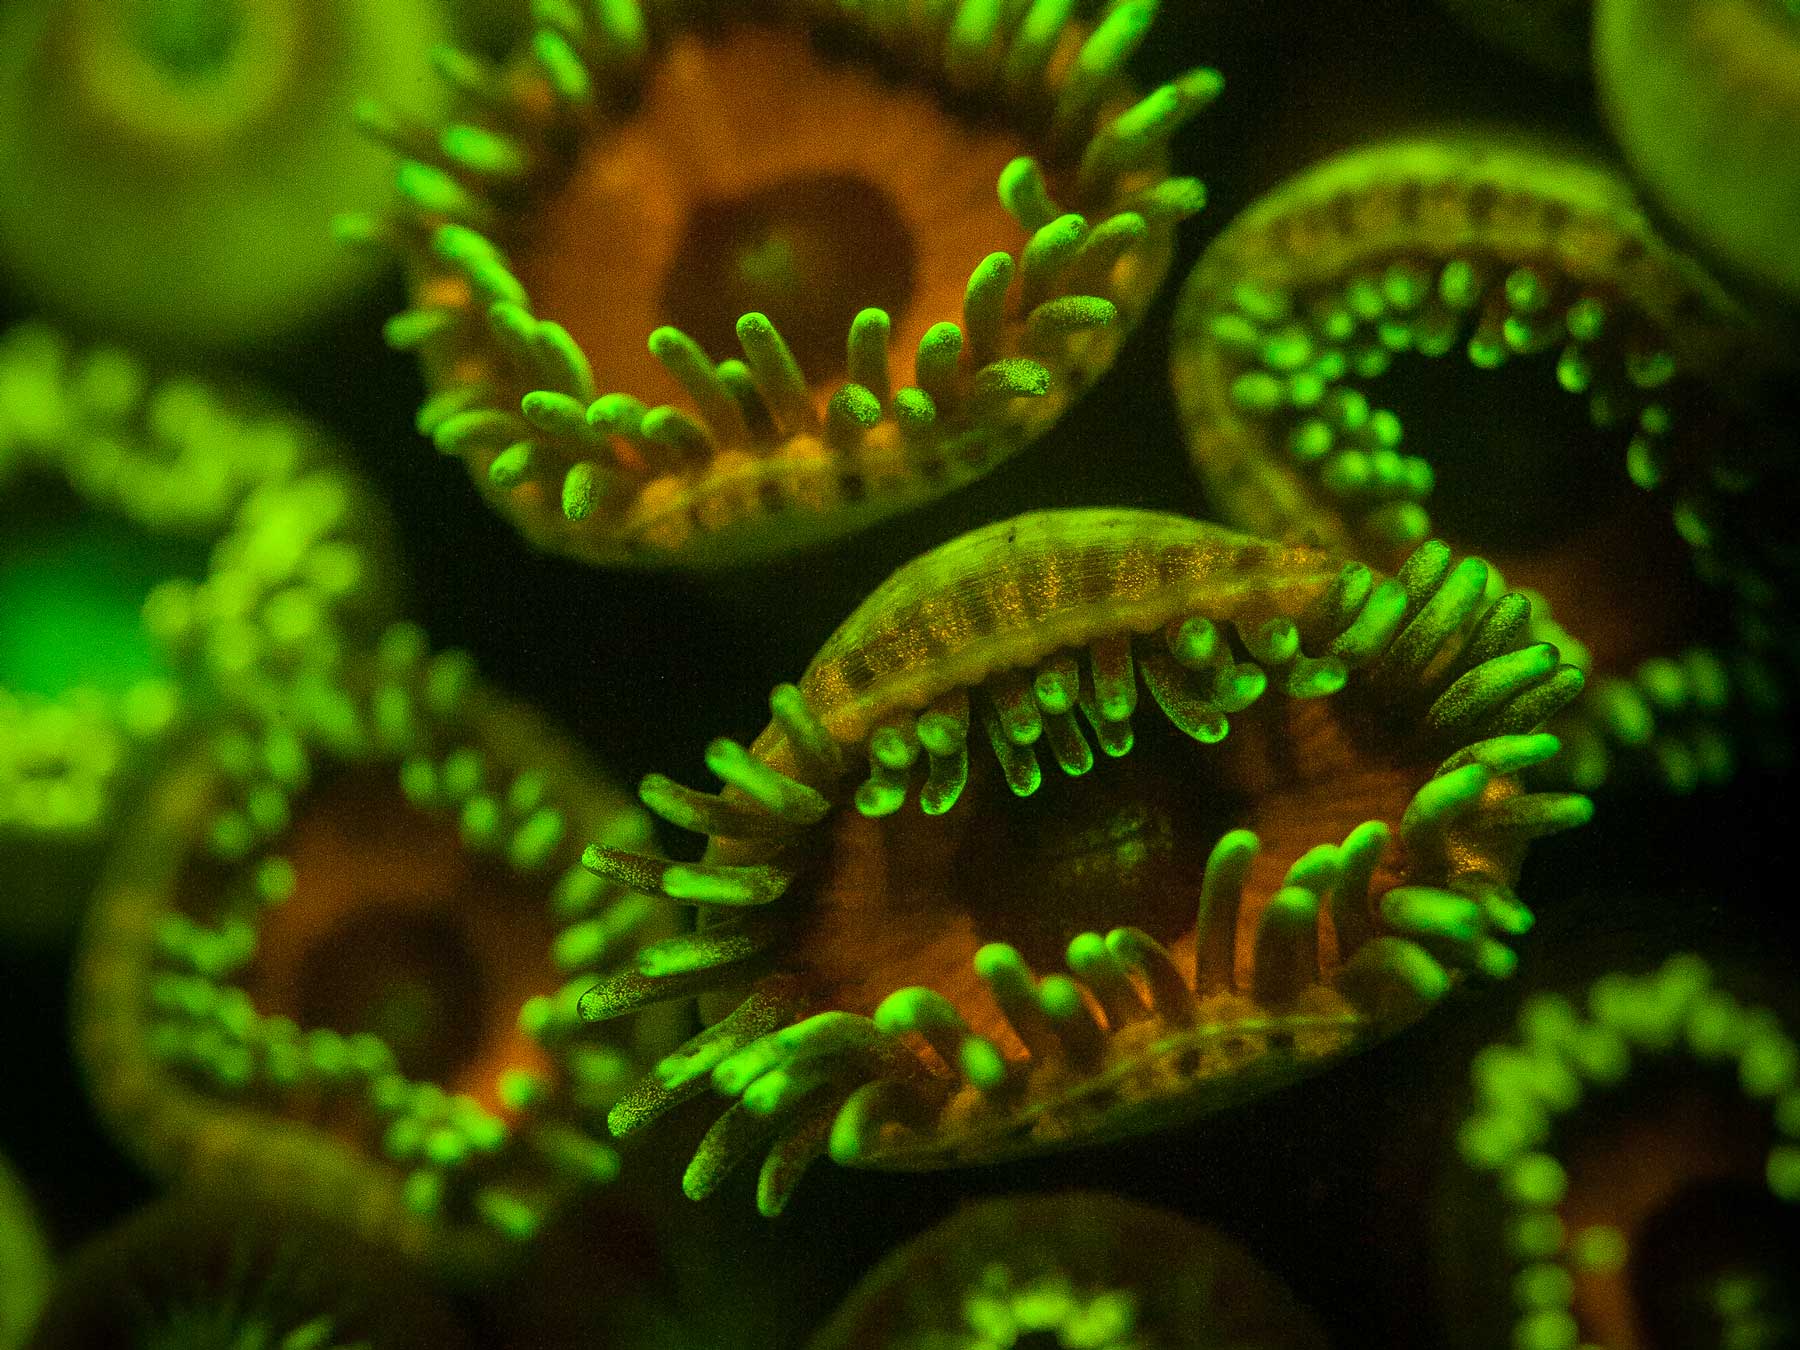 Fluorescence Underwater Photography Camera Settings and Technique